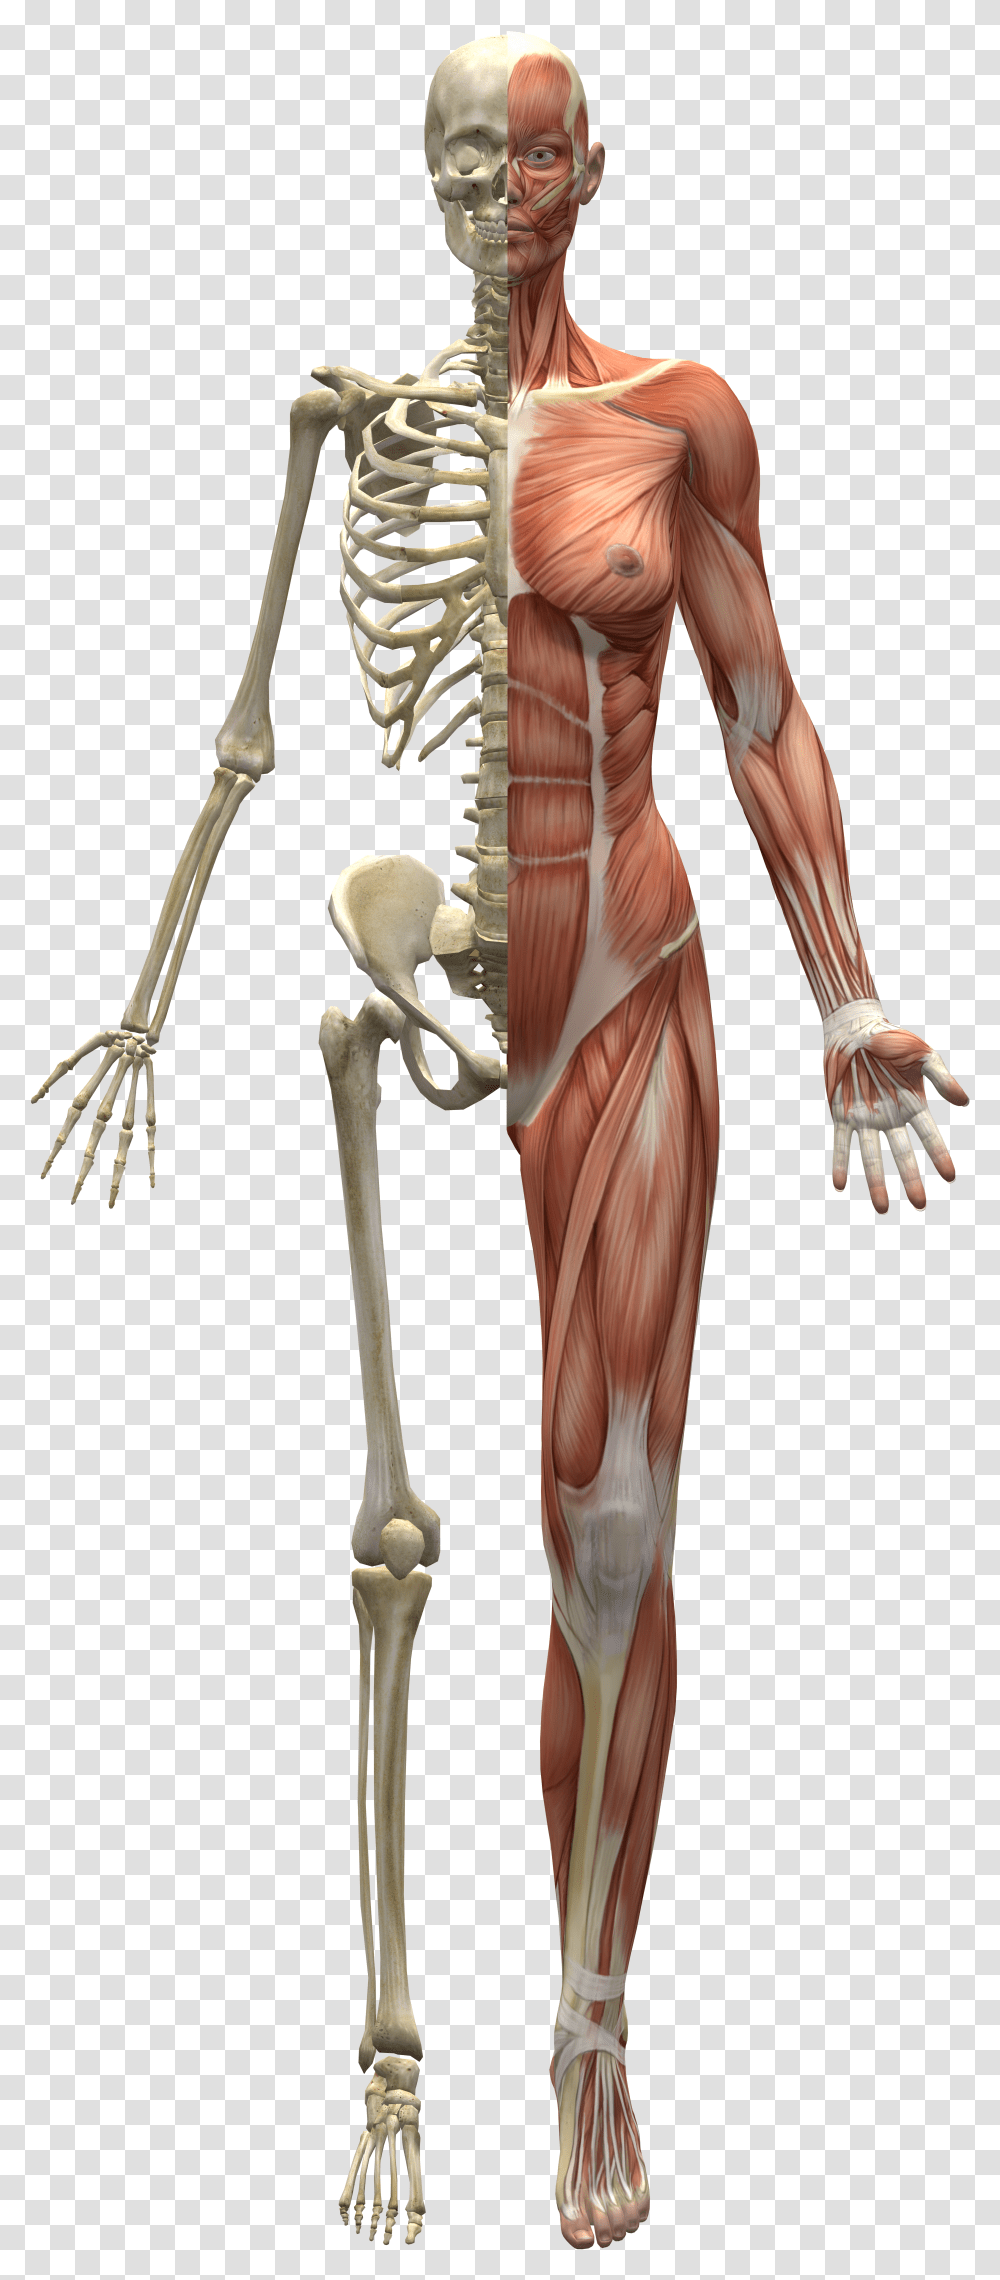 Skeleton And Muscles Transparent Png